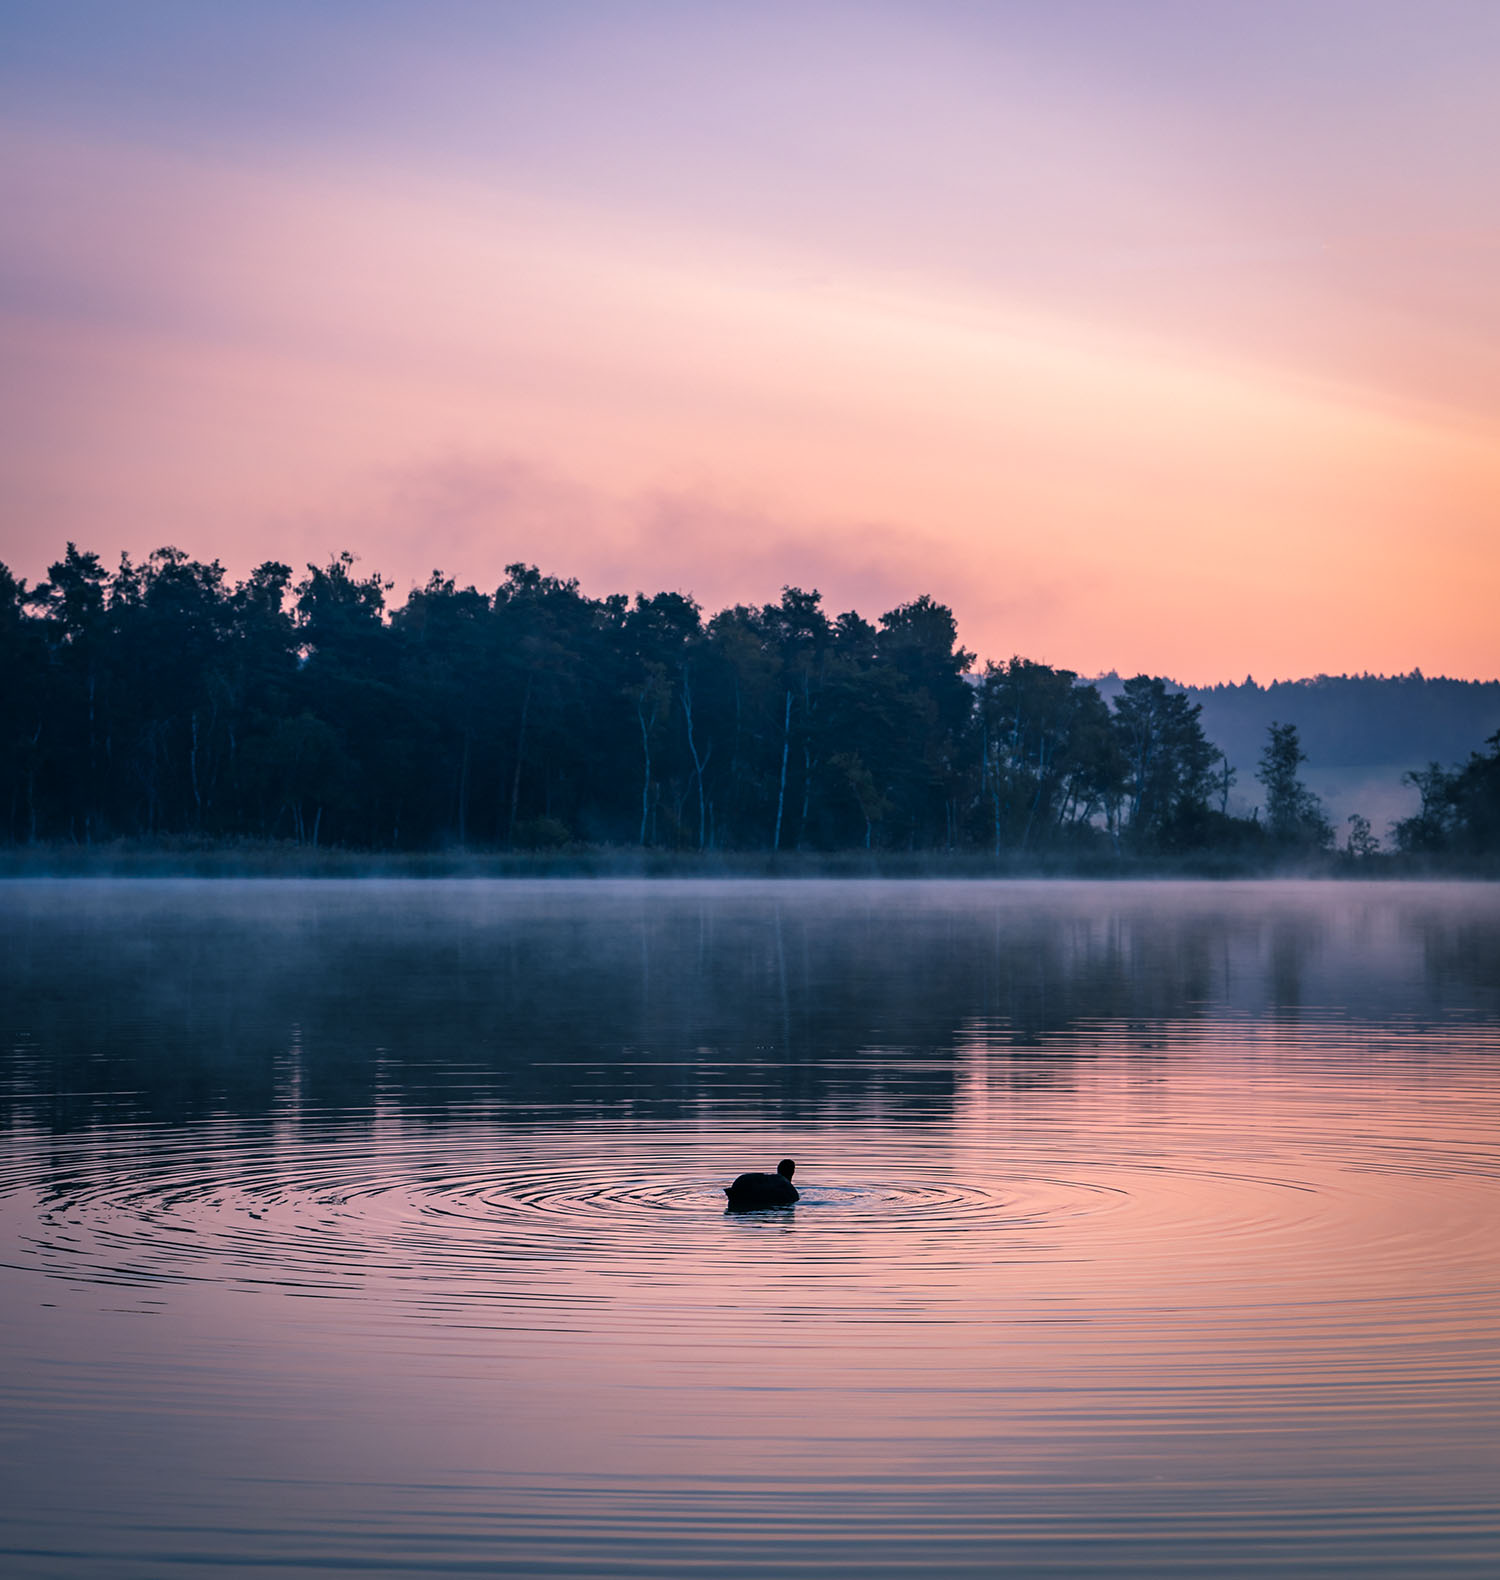 picture of the lake katzensee at sunrise